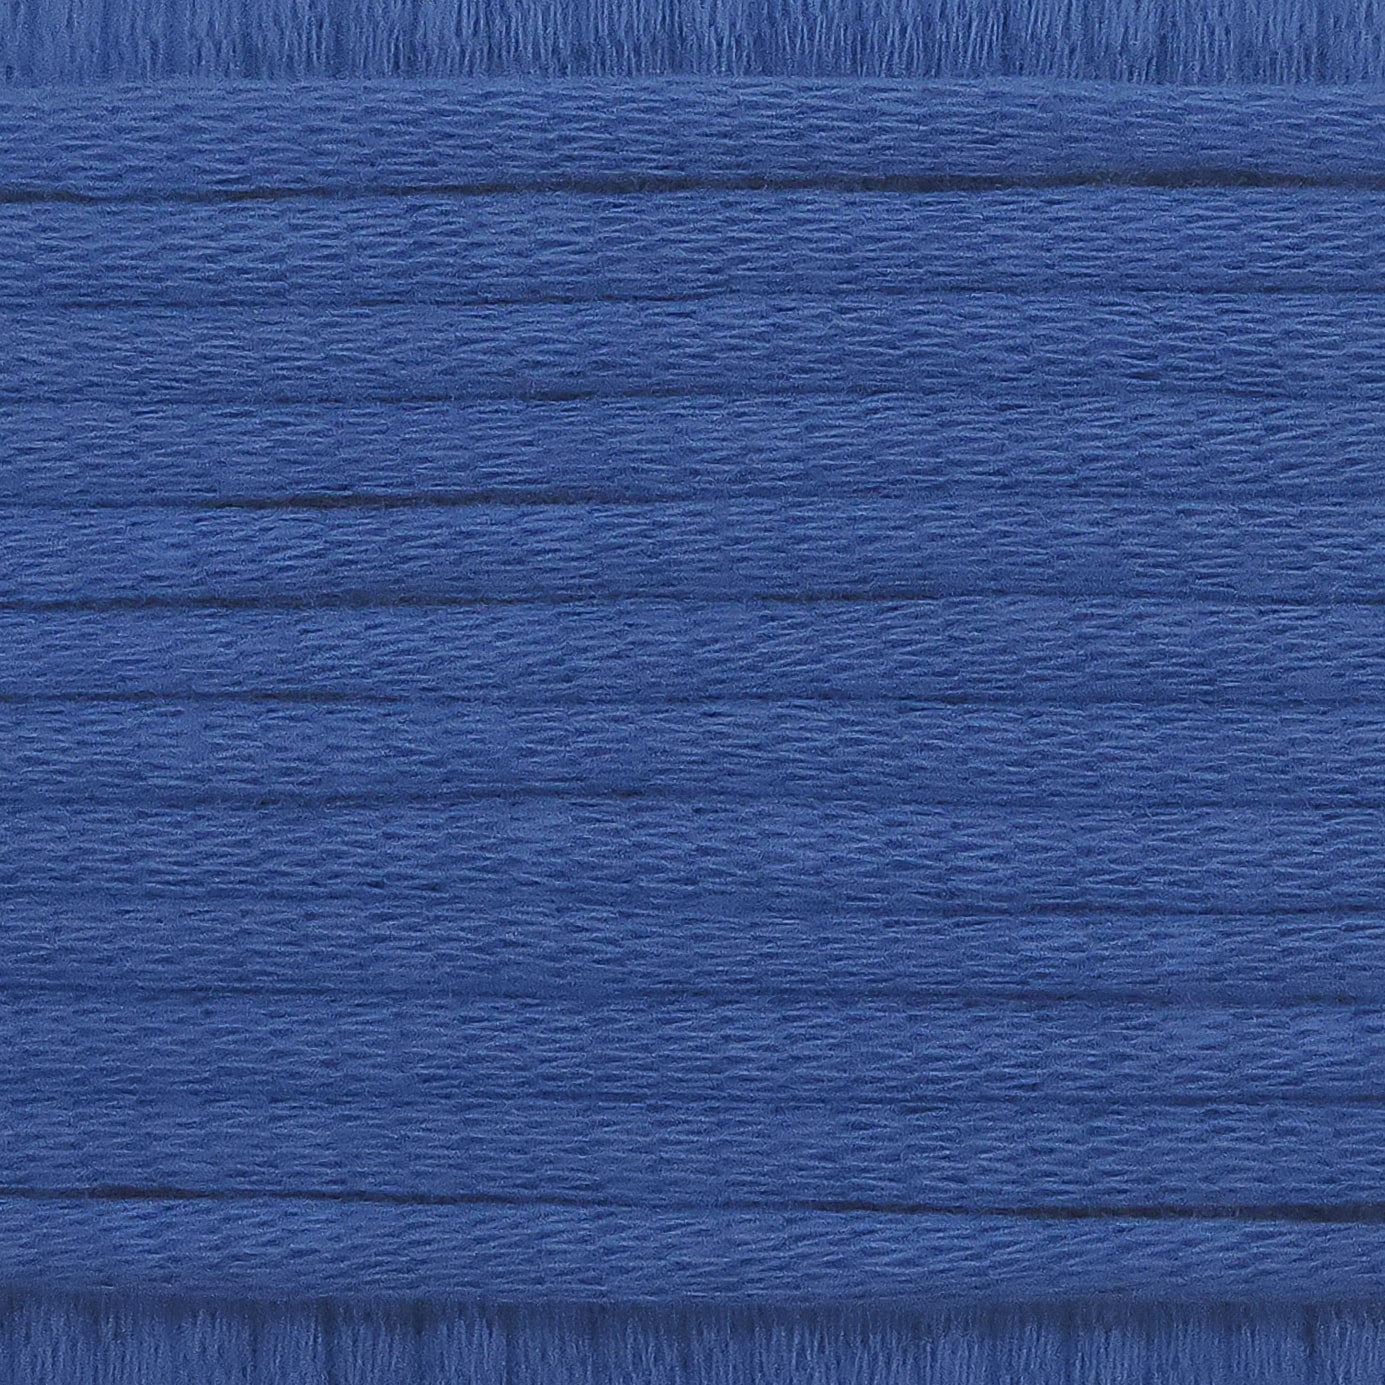 A close-up image showing the texture of a royal blue coloured yarn that is friendly for crochet beginners.